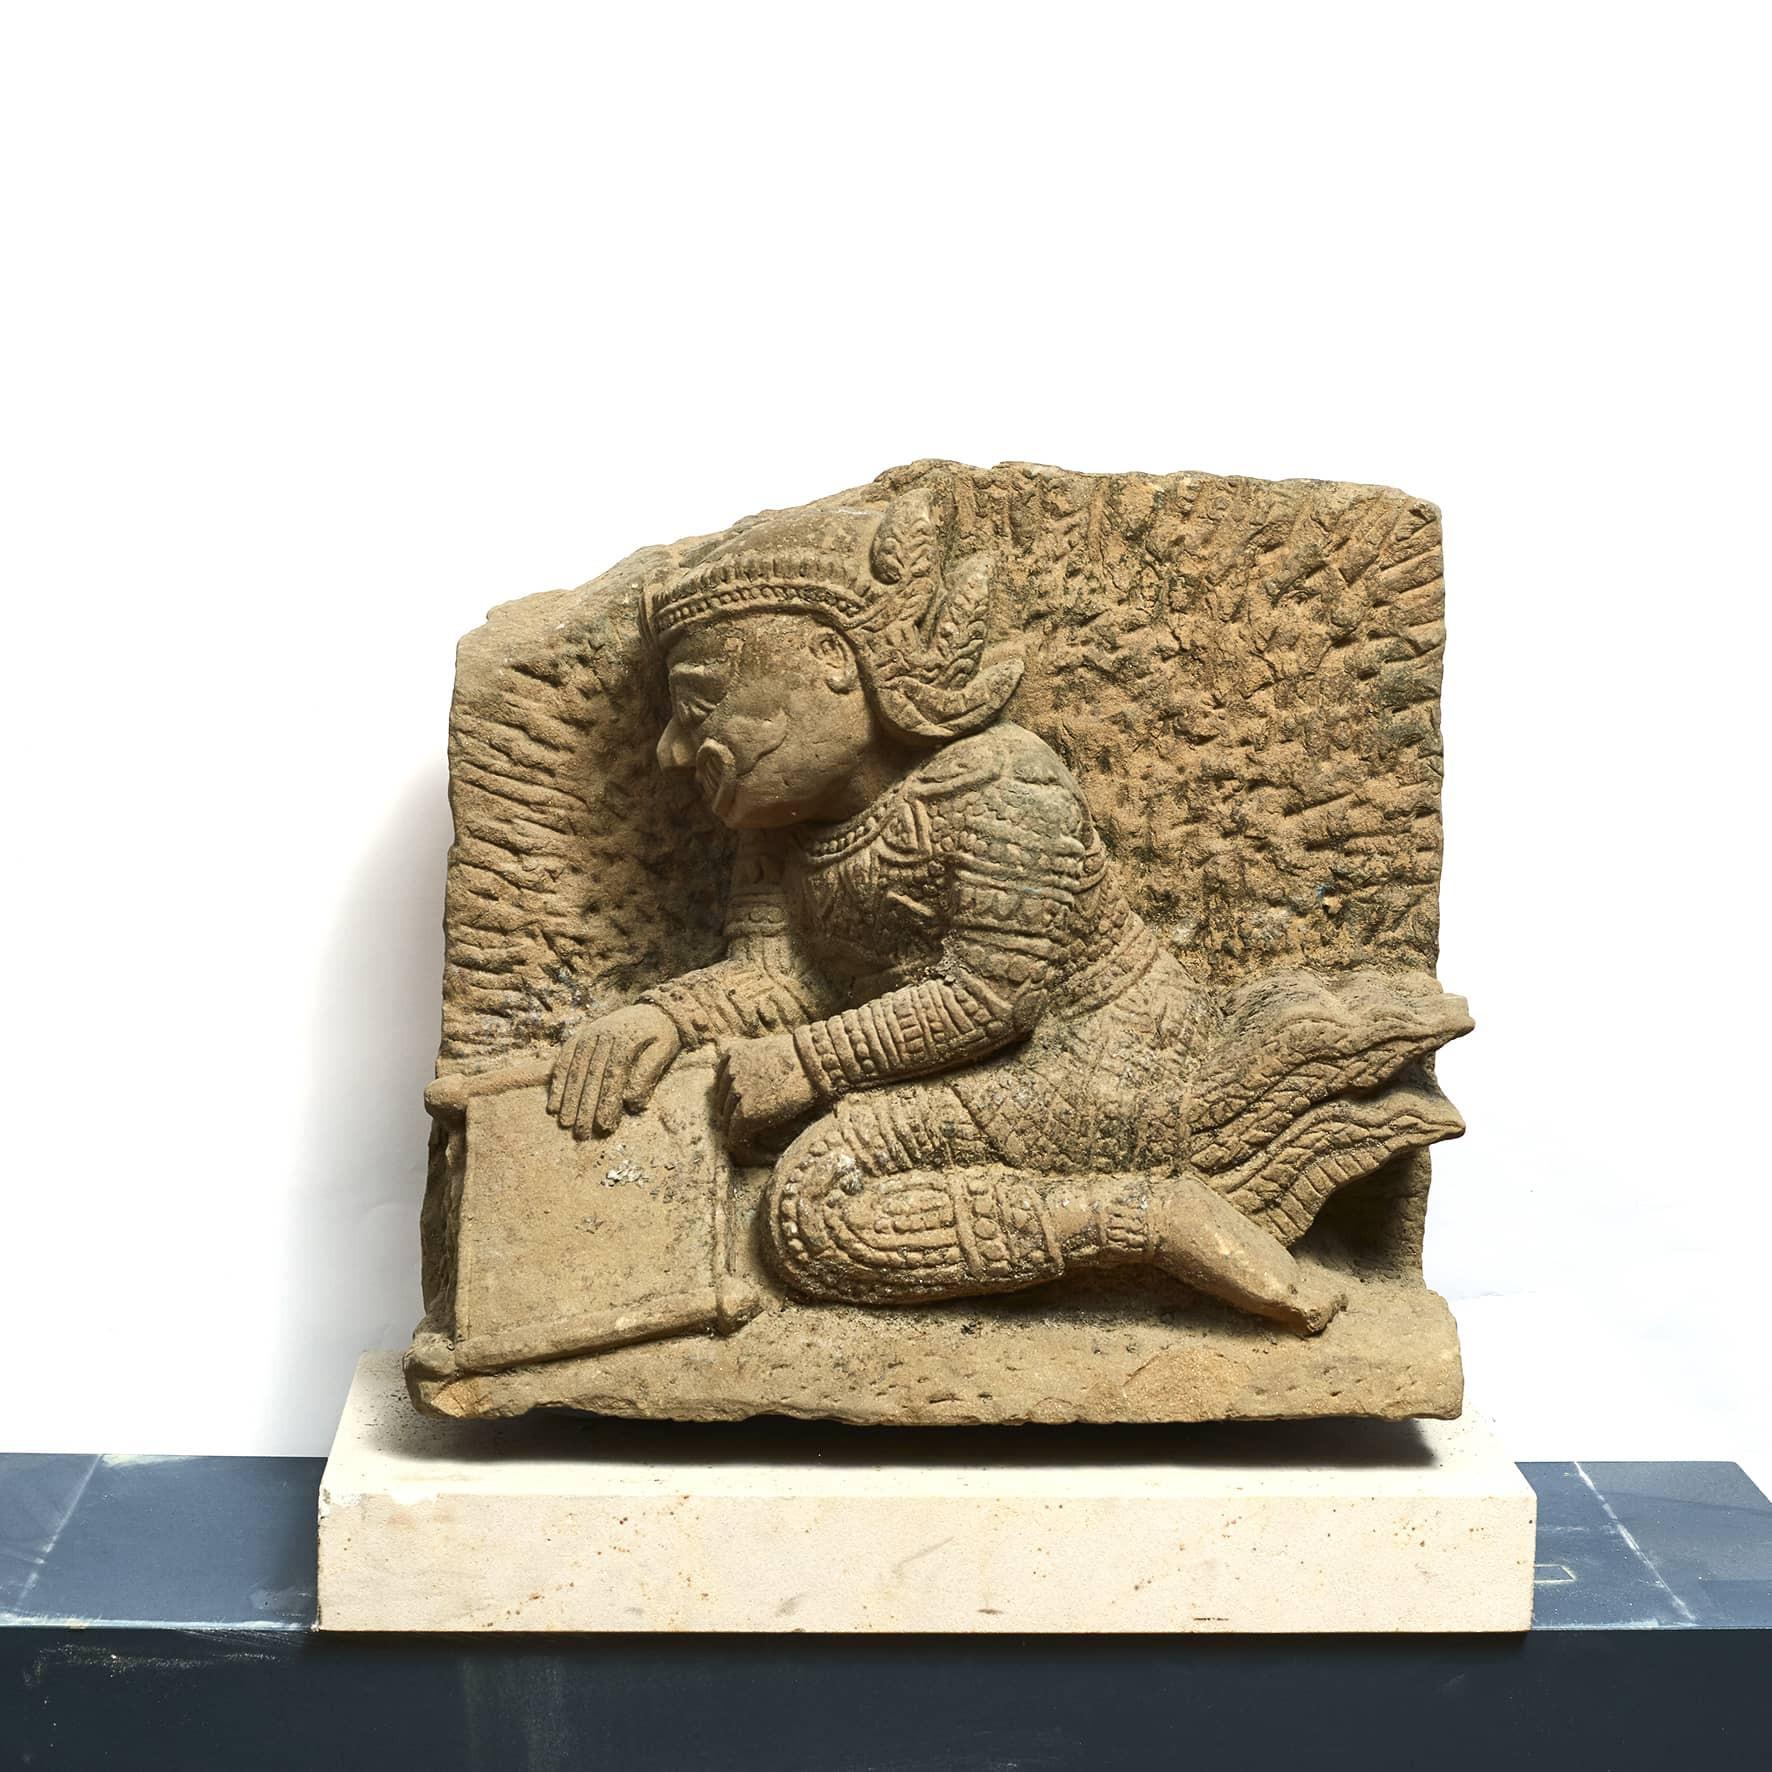 500-600 year old sculpture of 'Hanuman', the Hindu monkey god, carved in sandstone.
From temple in Burma, 15-16th century or even older.
In very good condition with no repairs.
From Danish private collection.

Mounted on plinth of light